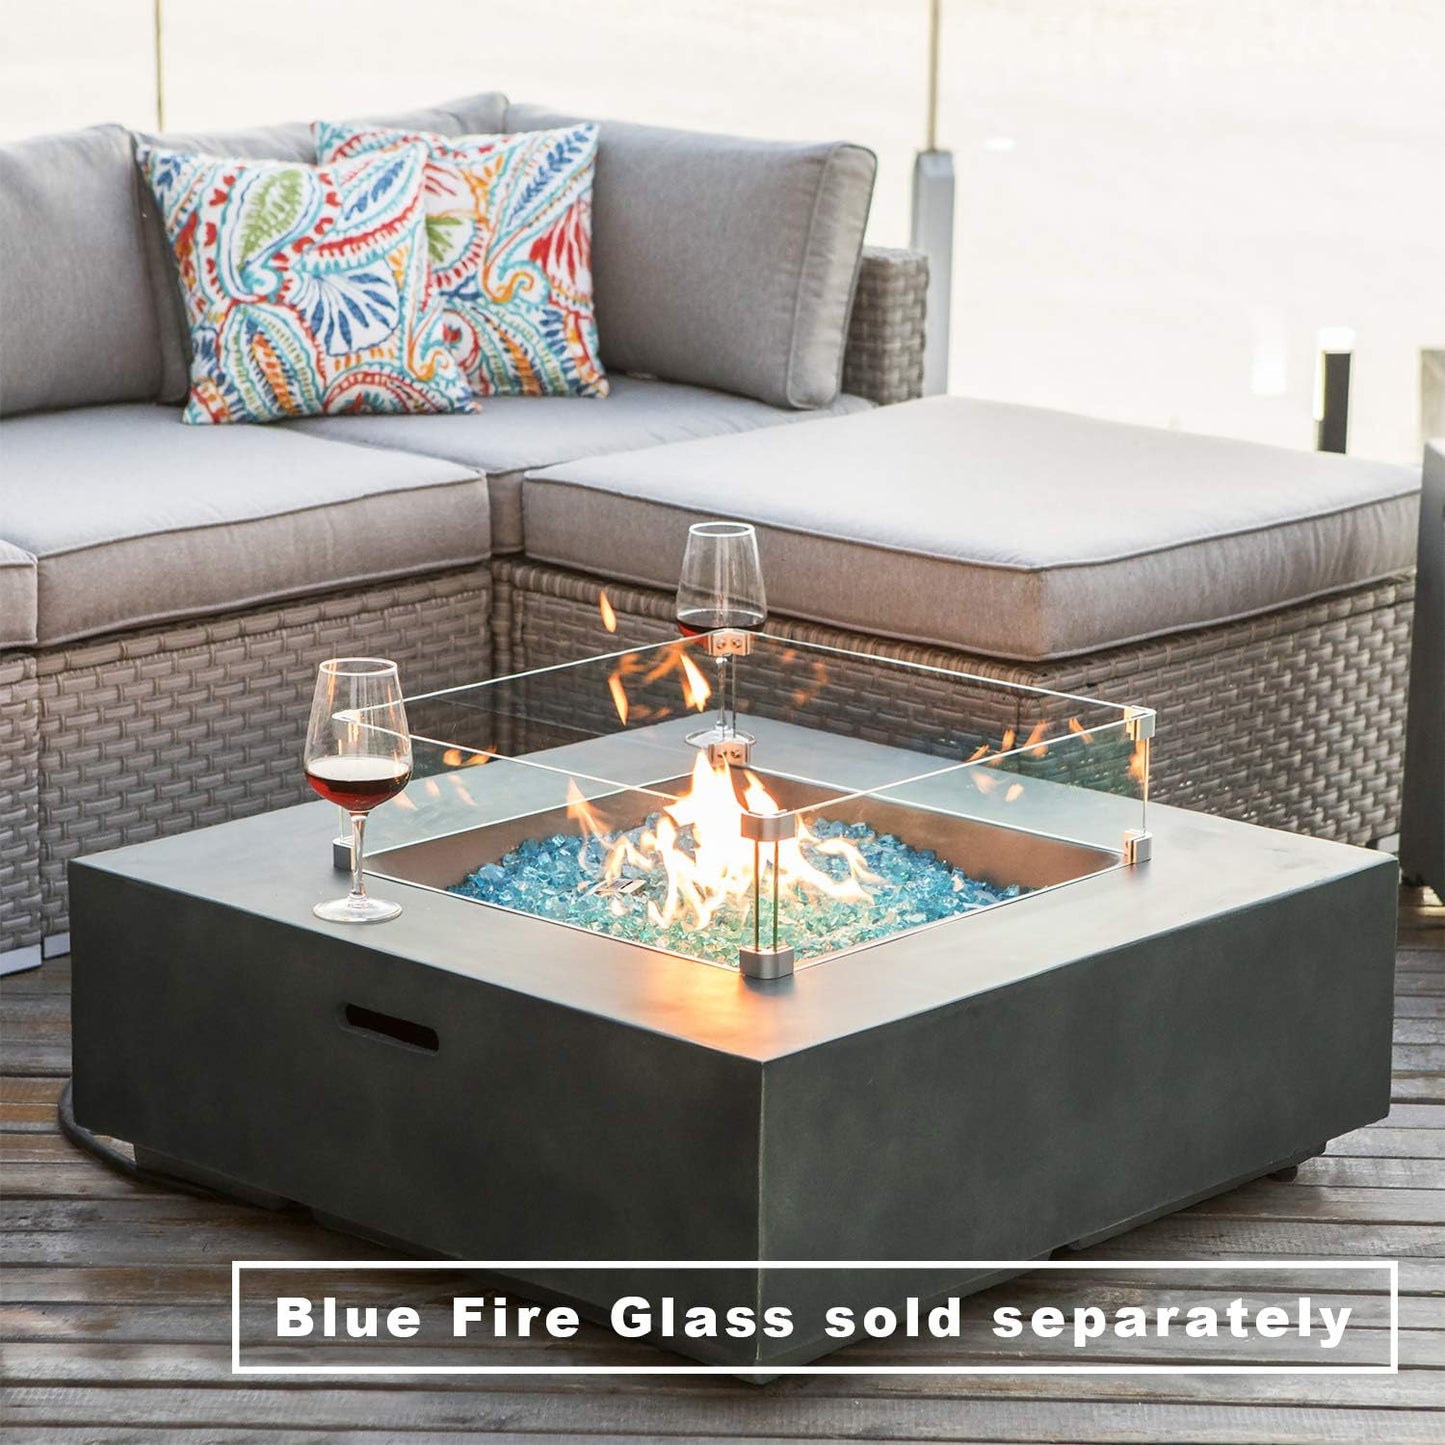 Outdoor Propane Fire Pit Coffee Table w Greyish-Green Square Faux Stone 35-inch Planter Base, 50,000 BTU Stainless Steel Burner, Wind Guard, Tank Outside and Rain